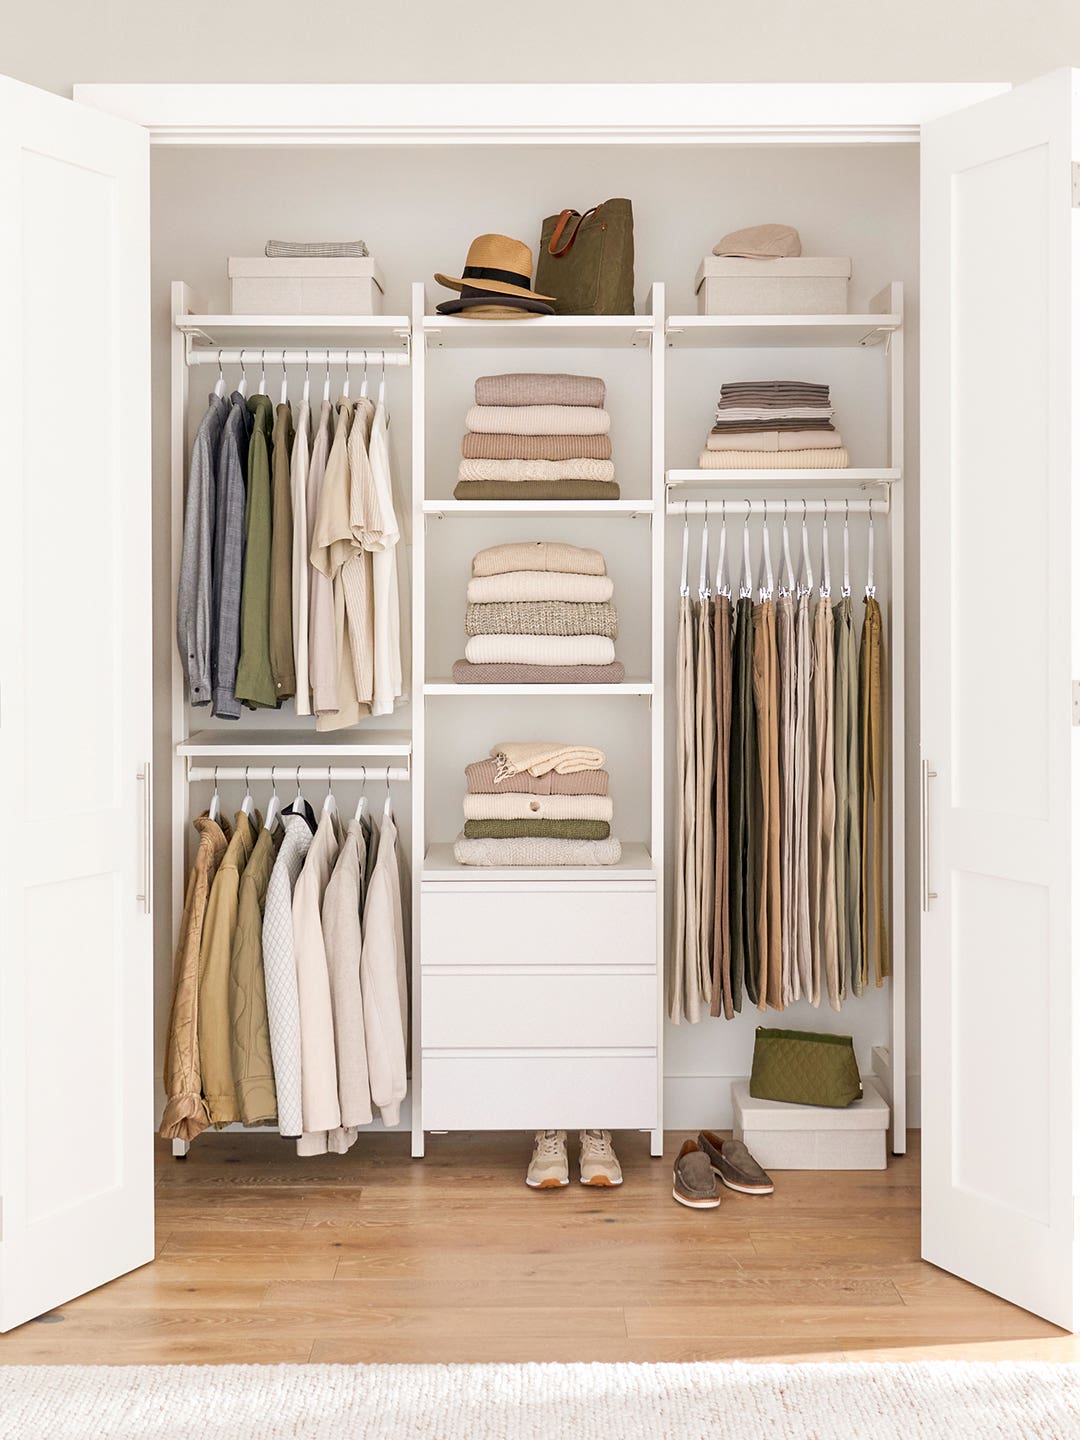 I Didn’t Think I Needed a Closet System to Get Organized Until I Tried Pottery Barn’s Version